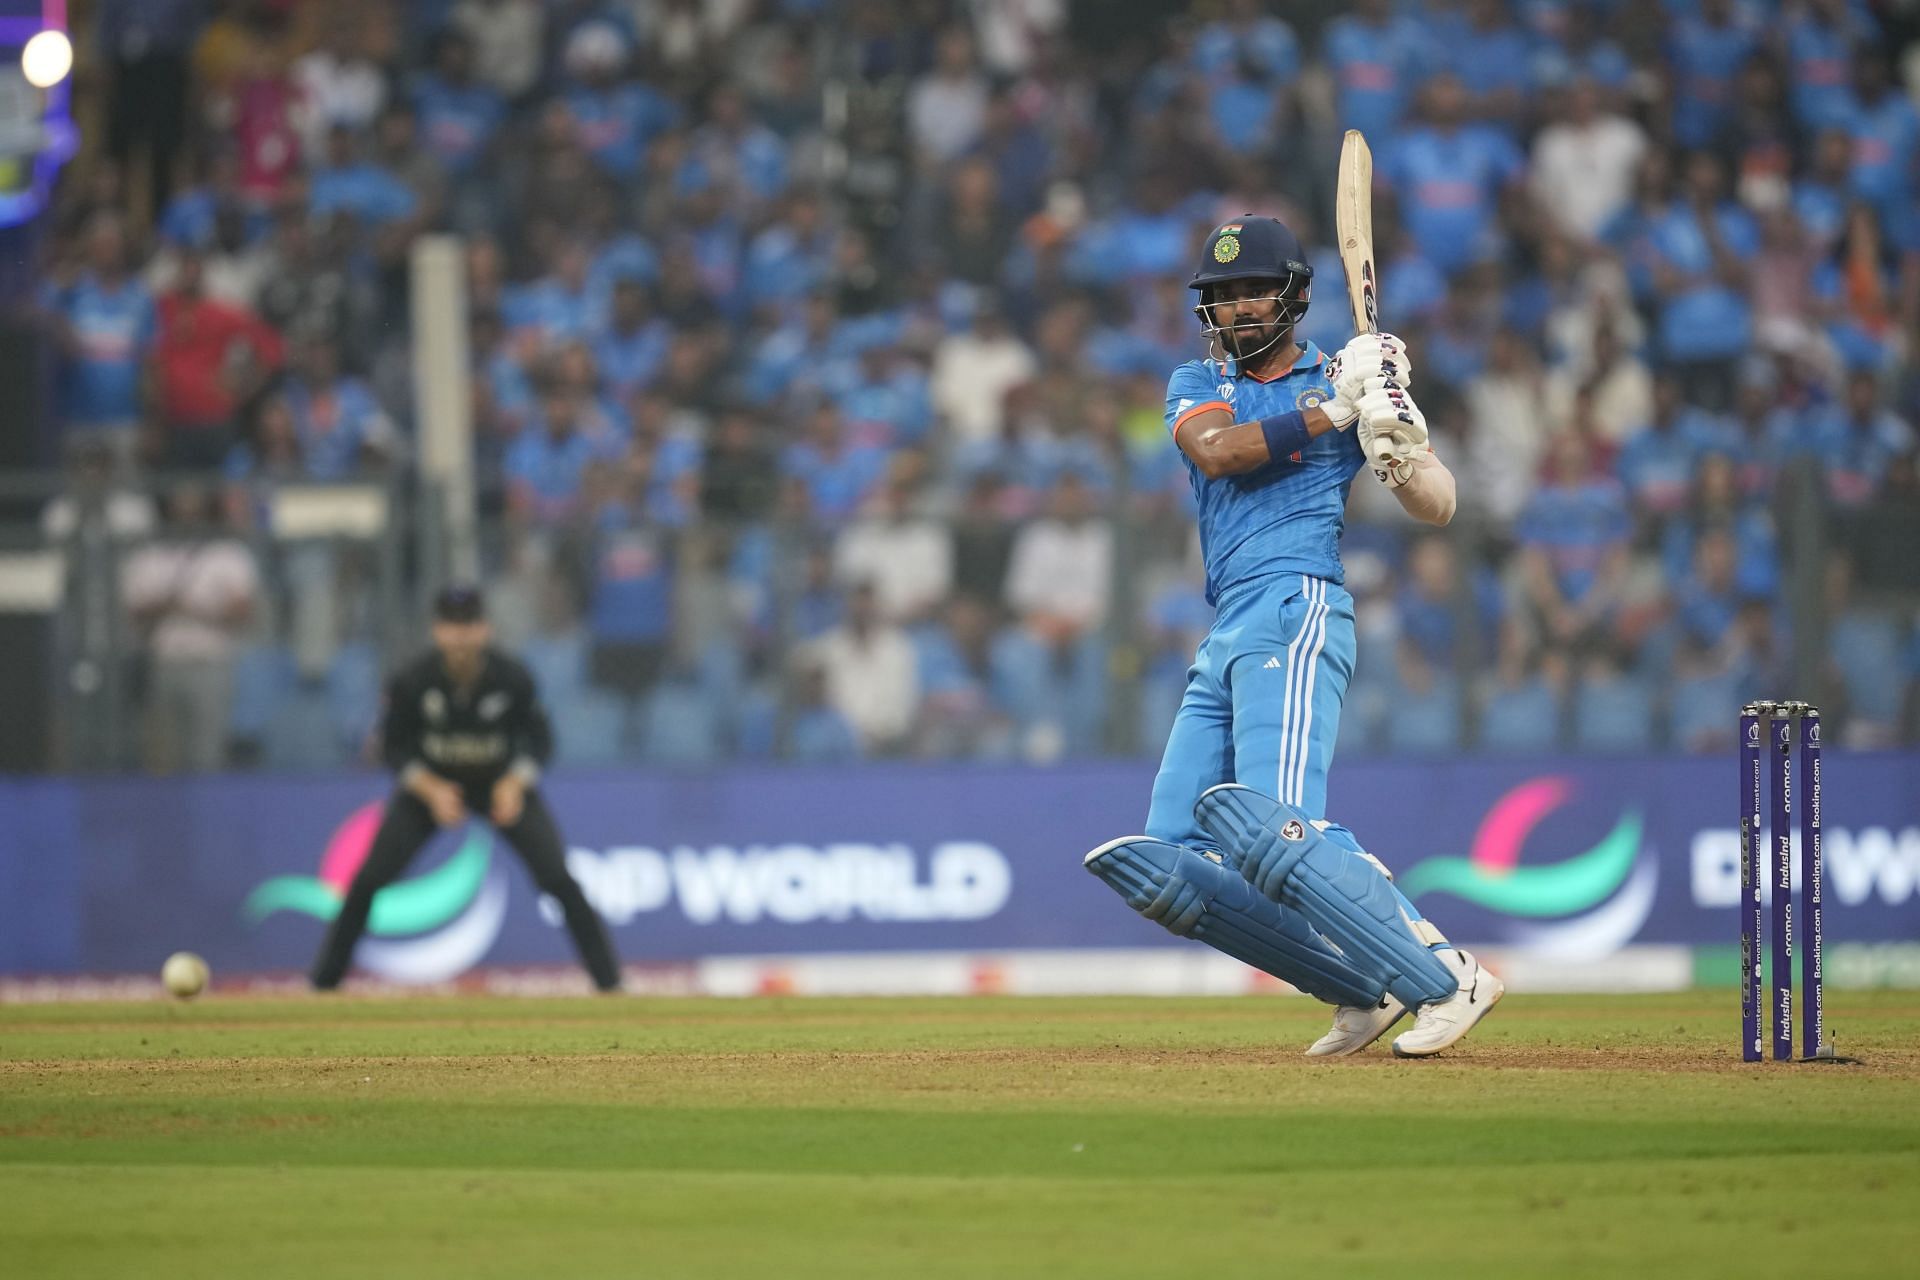 KL Rahul was stellar for India